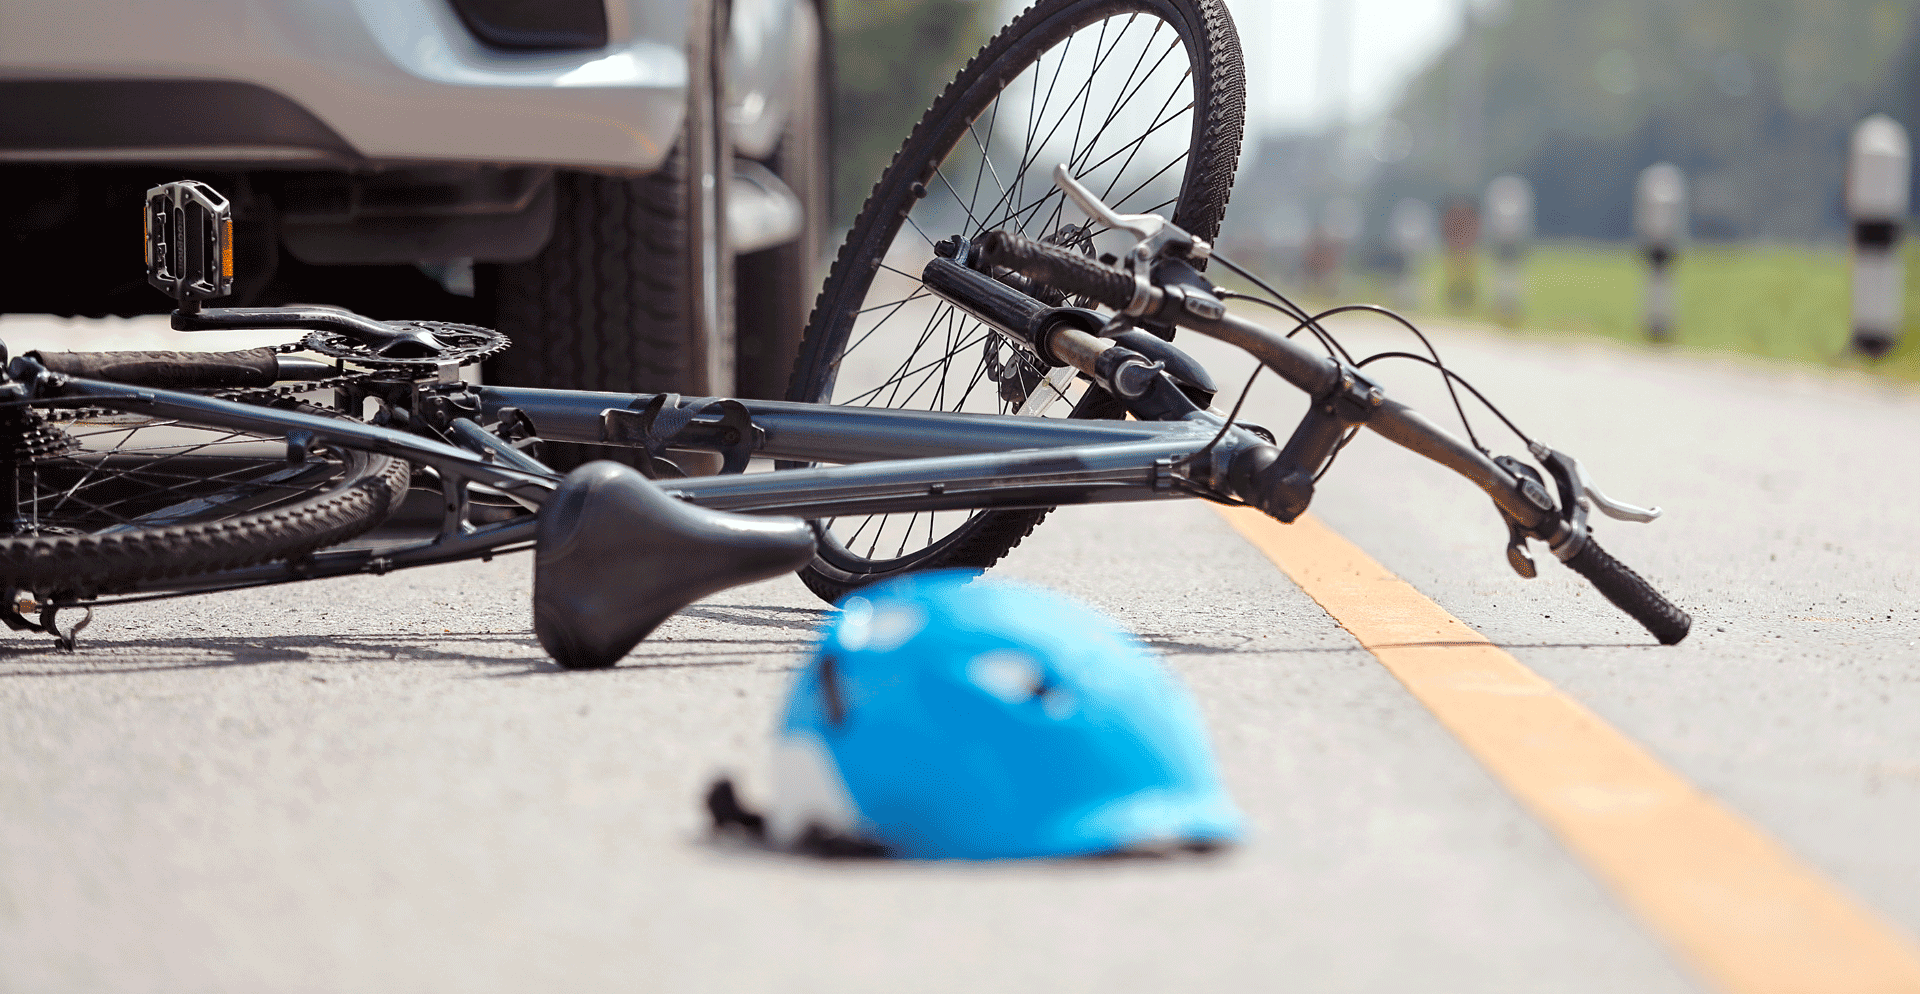 Crashed bicycle and bicyclist helmet